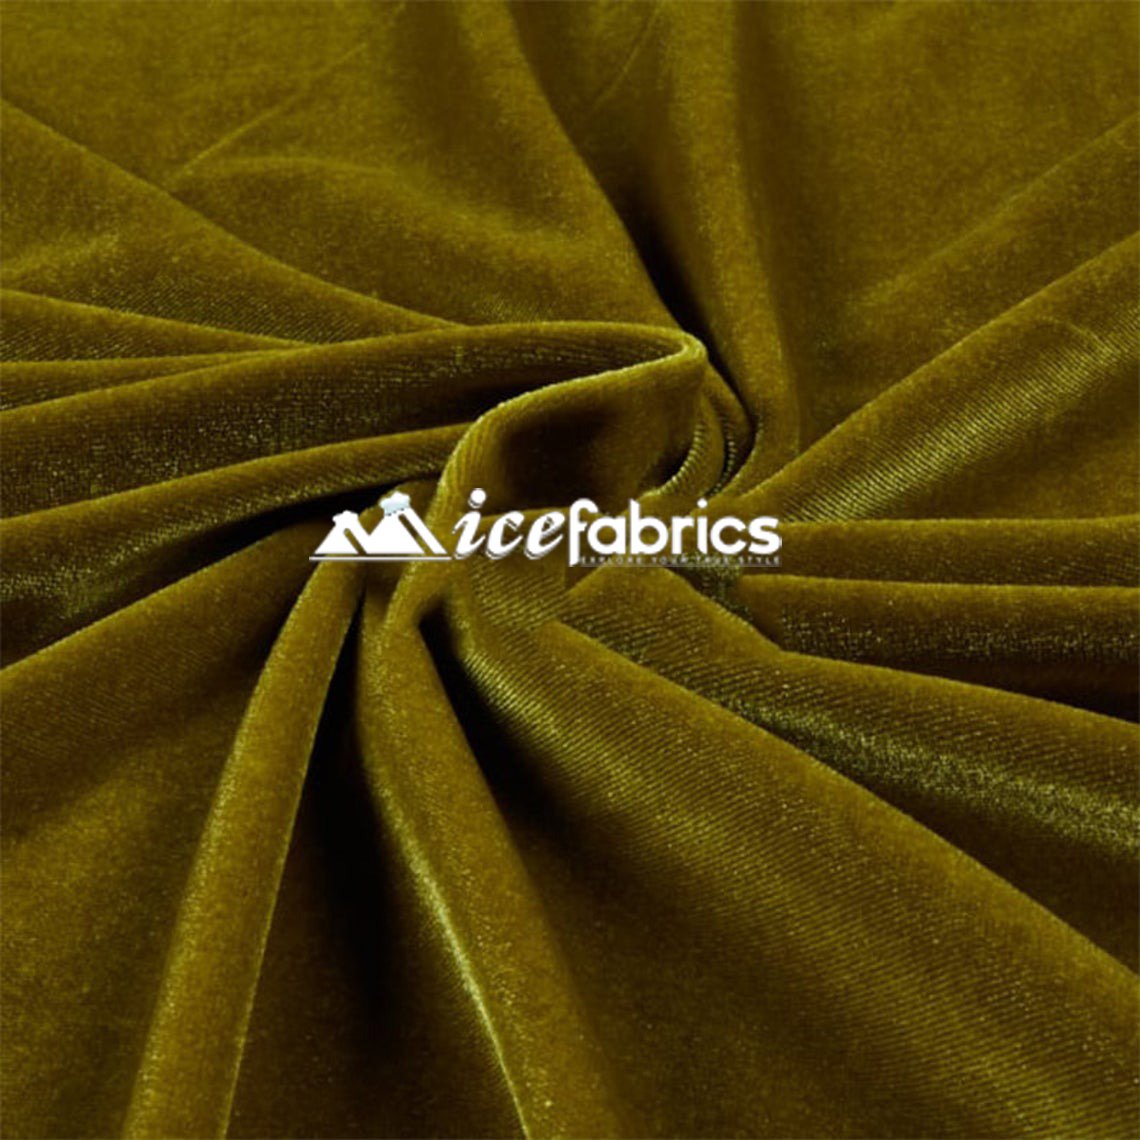 Hight Quality Stretch Velvet Fabric By The Roll (20 yards) Wholesale FabricVelvet FabricICE FABRICSICE FABRICSM/OliveBy The Roll (60" Wide)Hight Quality Stretch Velvet Fabric By The Roll (20 yards) Wholesale Fabric ICE FABRICS M/Olive